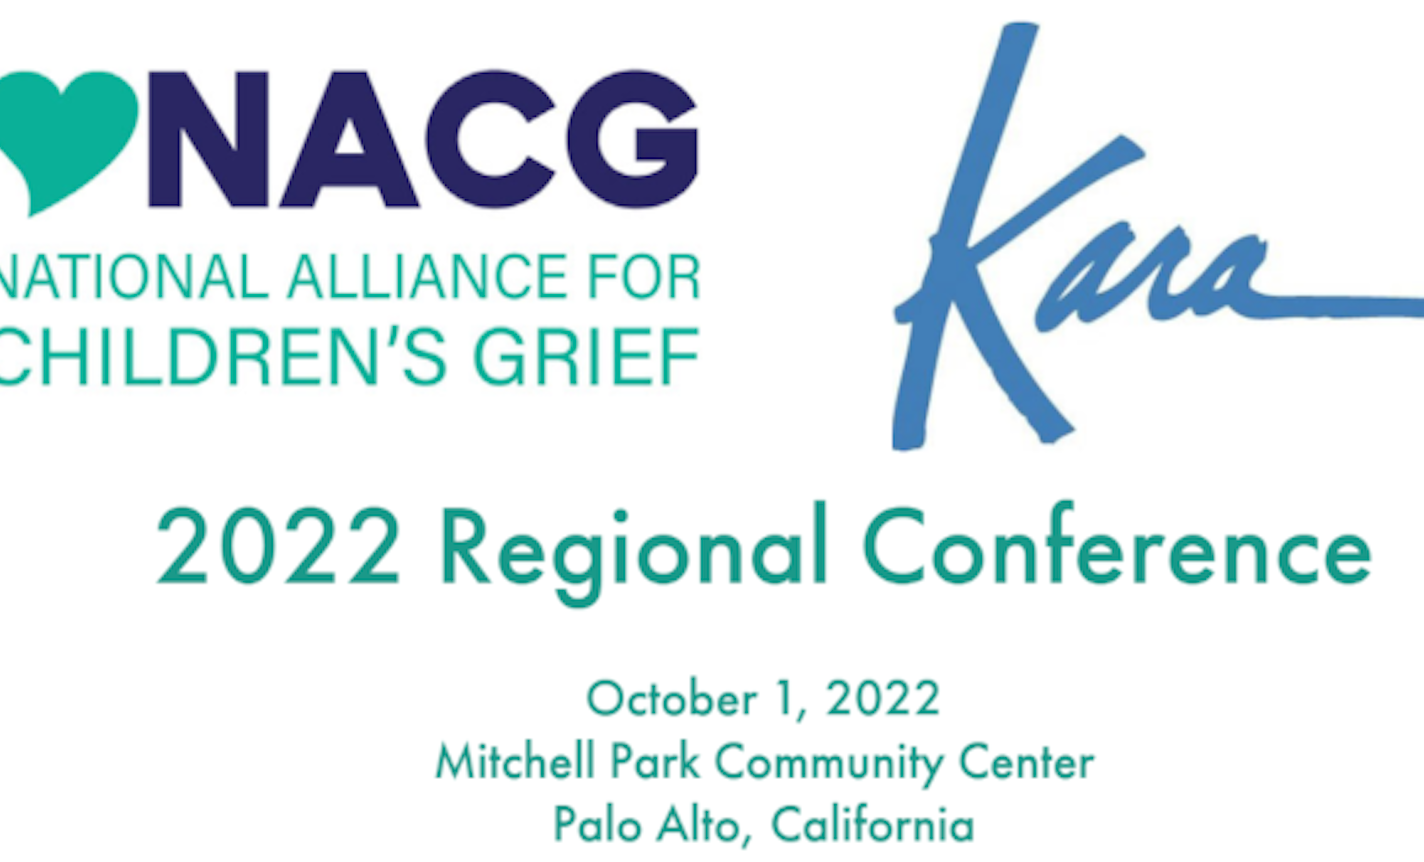 No Child Grieves Alone - NACG Conference Hosted by Kara